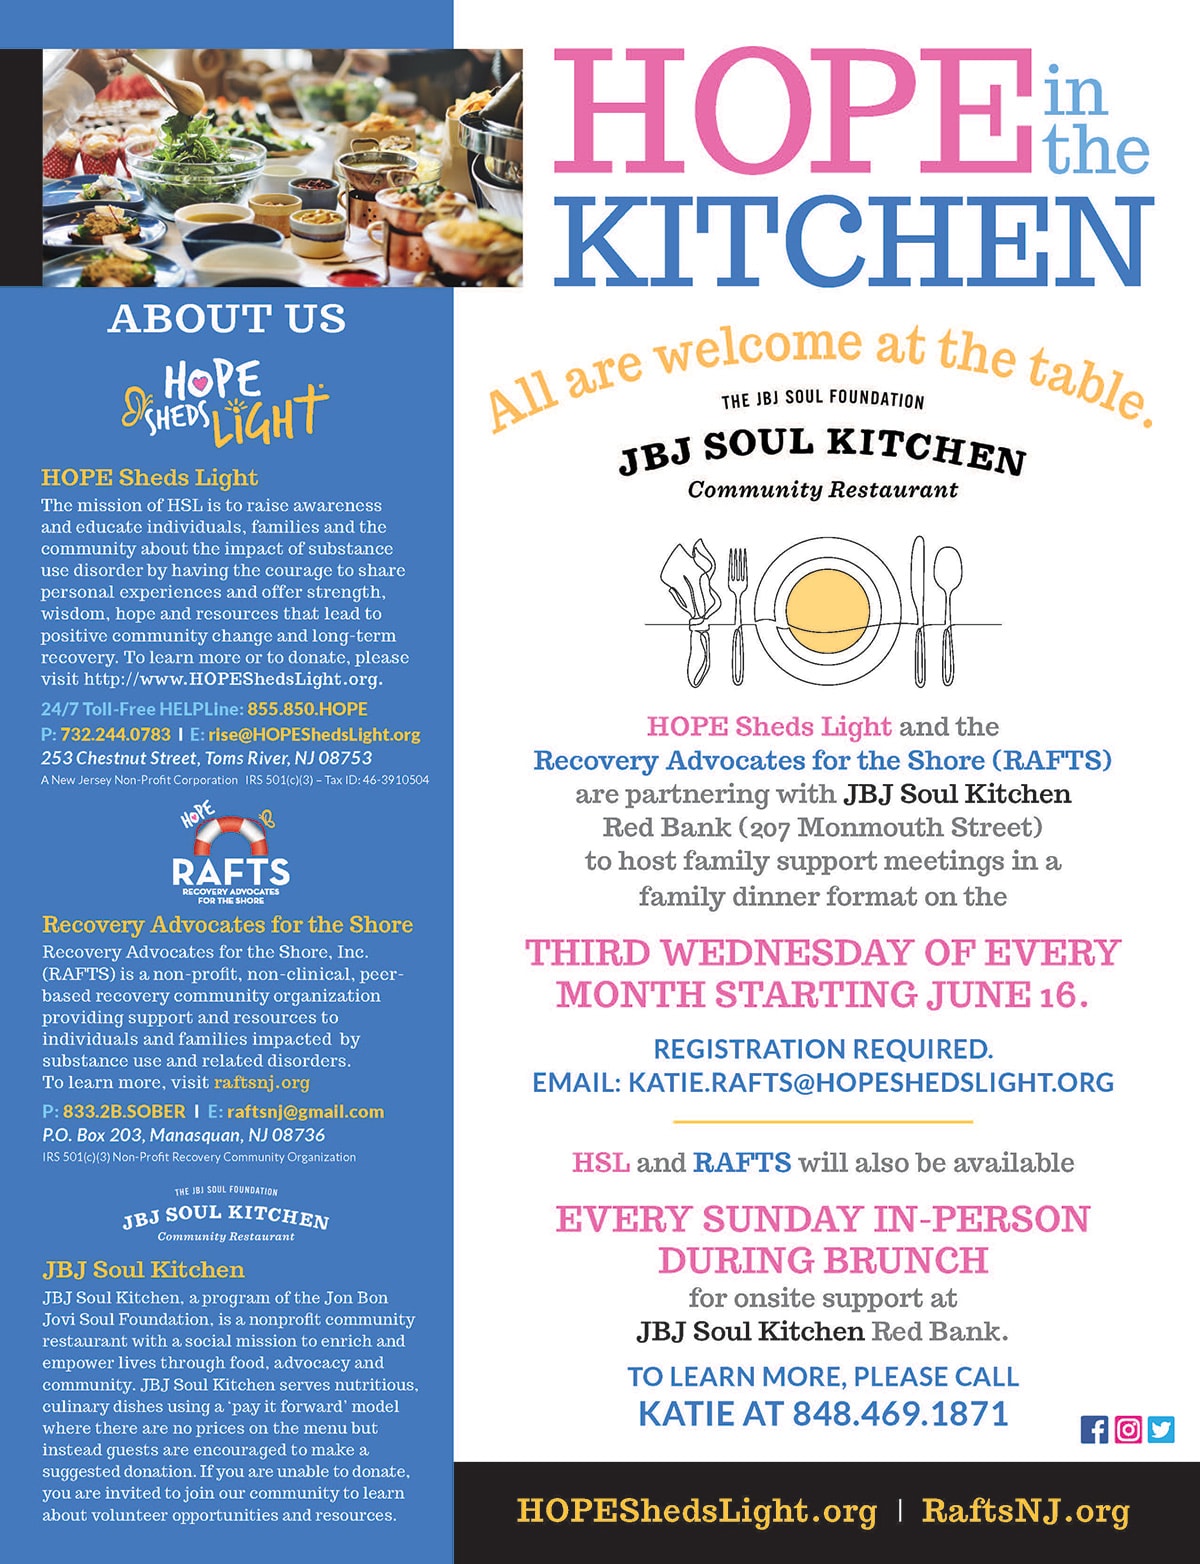 HOPE Sheds Light and Recovery Advocates for the Shore partner with JBJ Soul Kitchen to host family support meeting